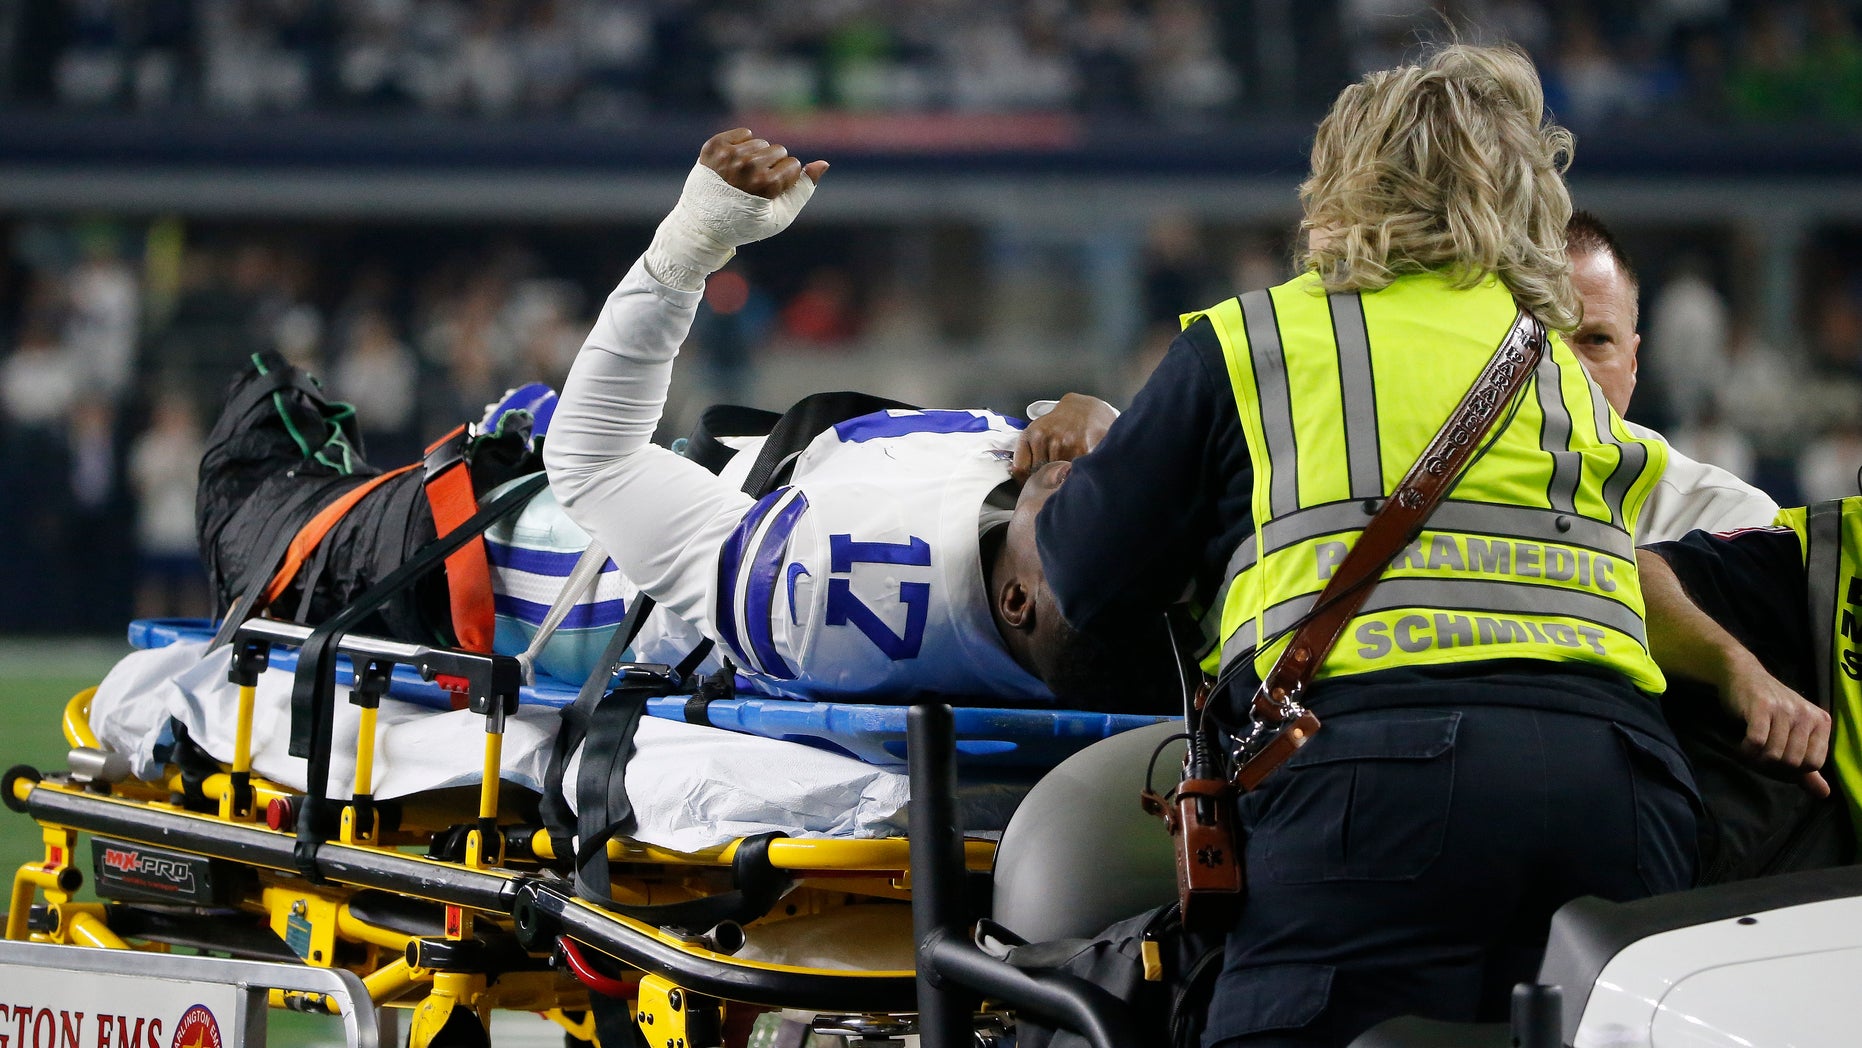 Dallas Cowboys player Allen Hurns suffers gruesome leg injury in playoff game